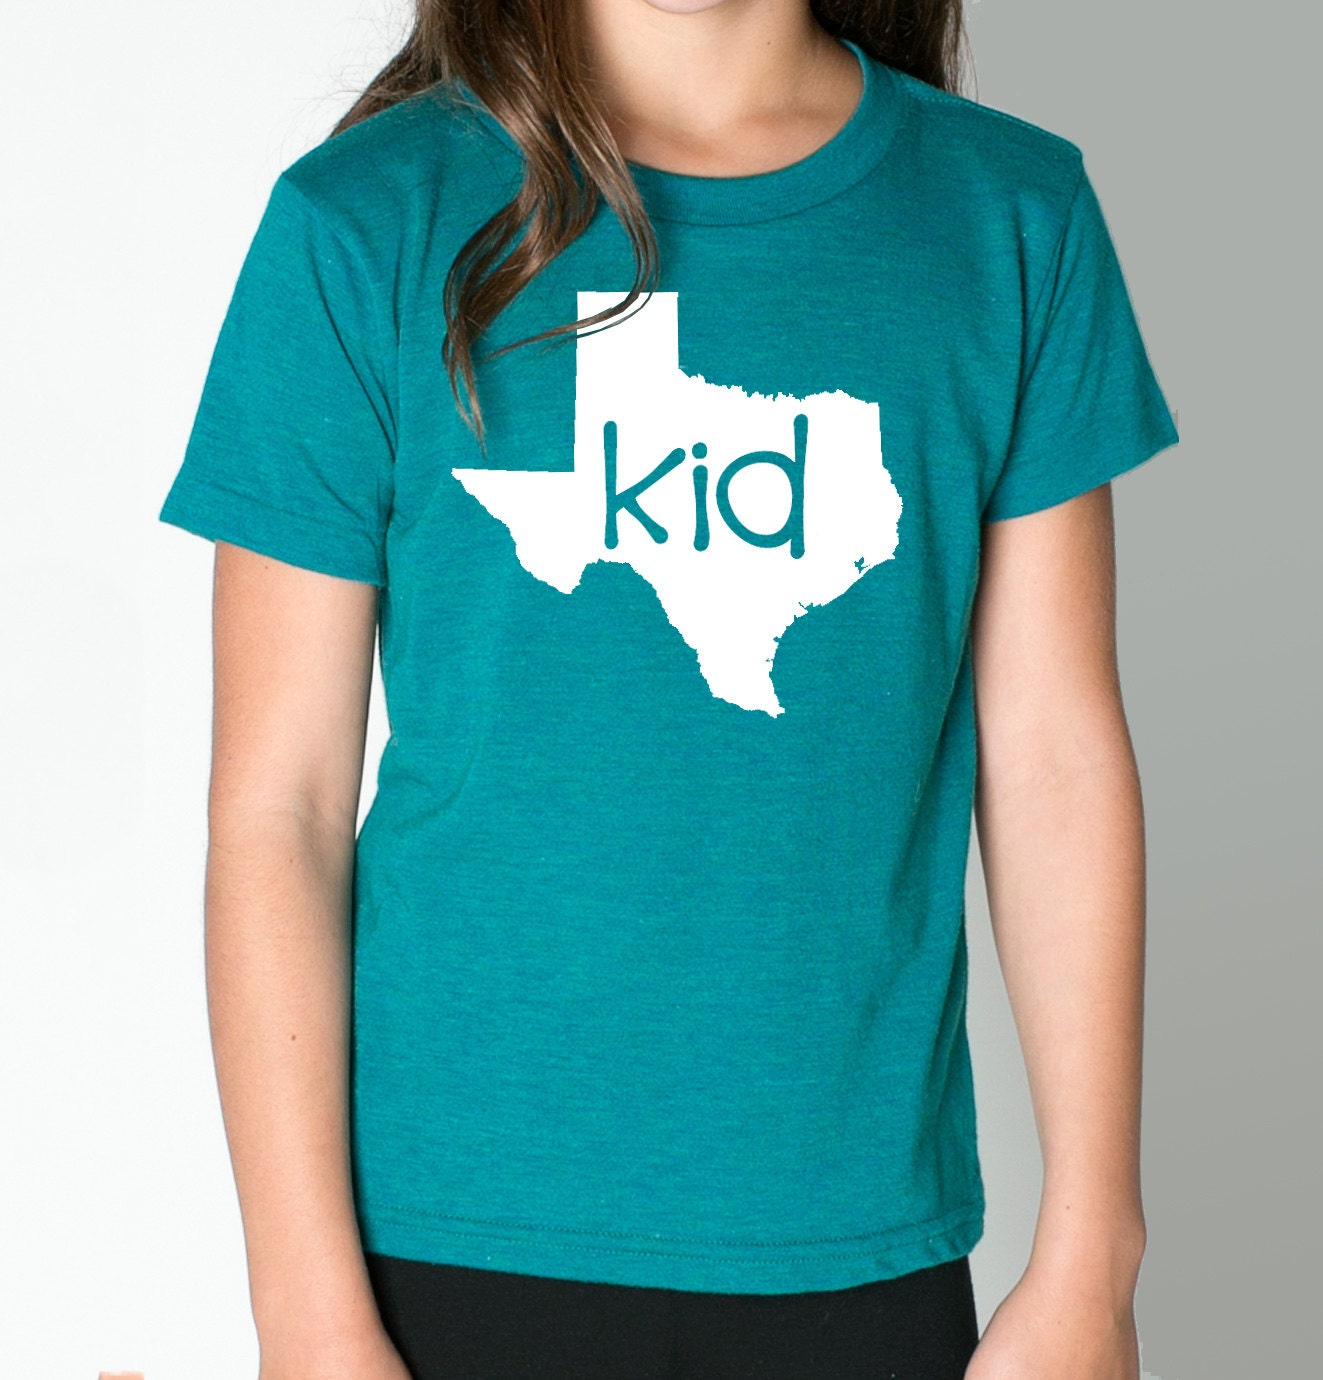 All States "Kid' Tri Blend Toddler, Kids, Youth Track T-Shirt - Sizes 2, 4, 6, 8, 10, 12